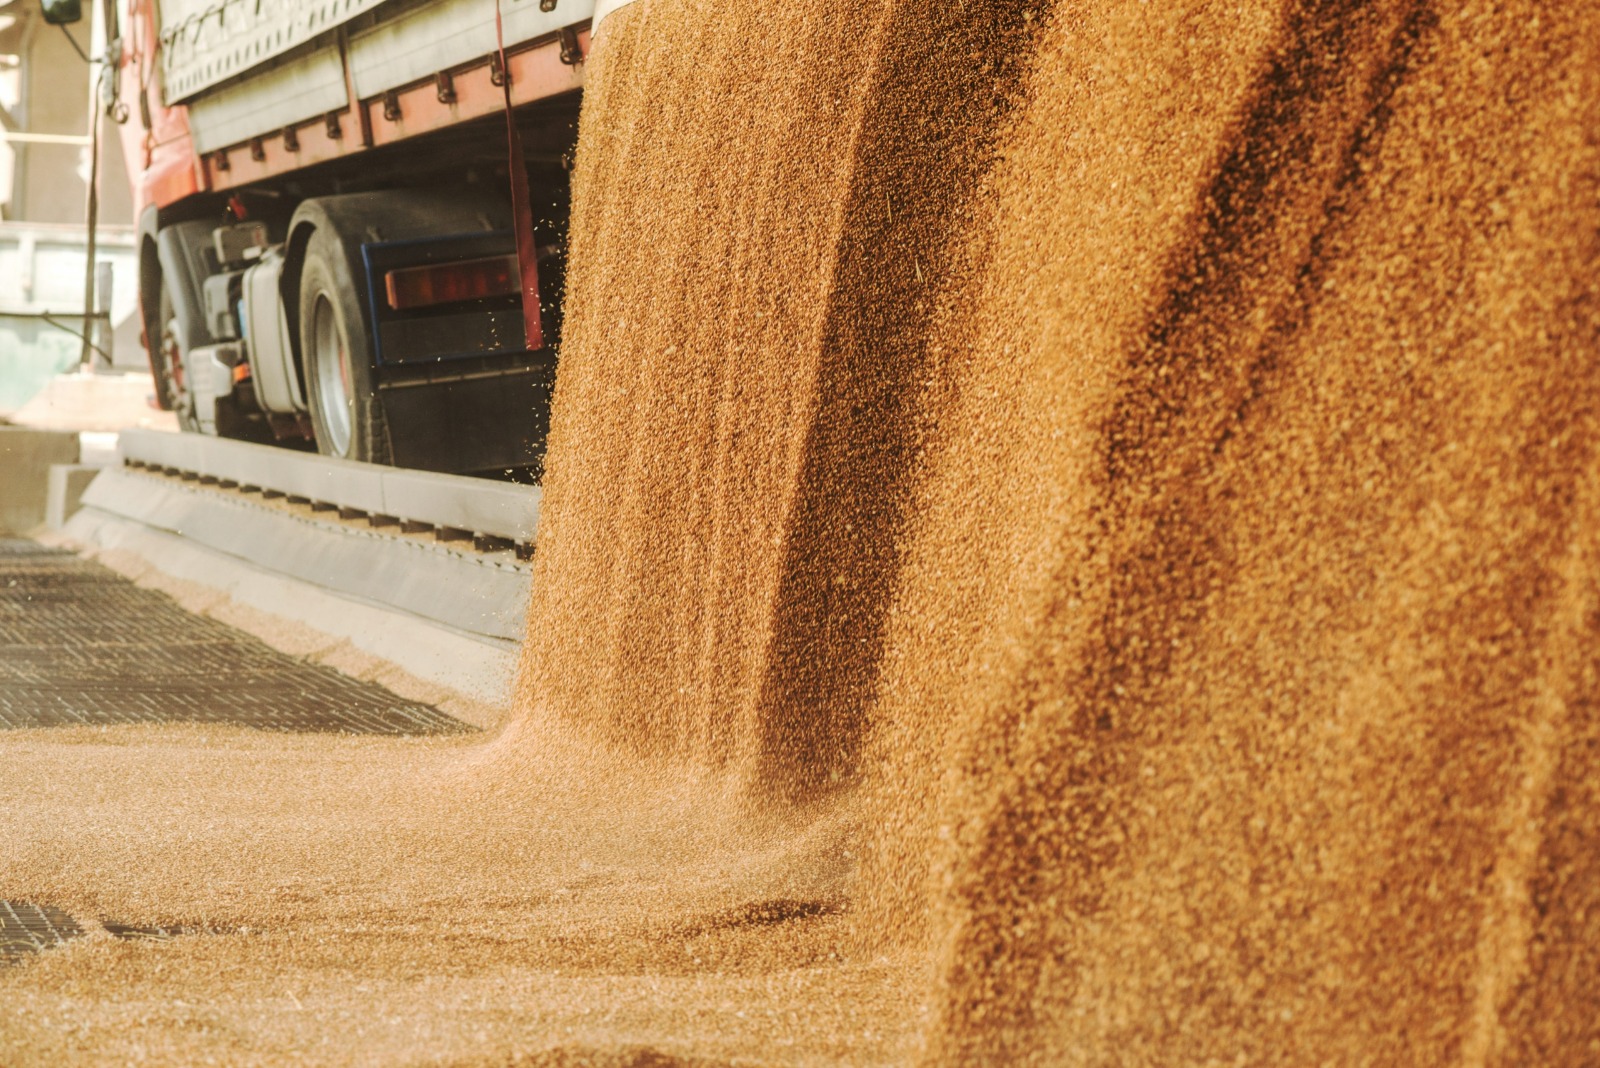 Egypt is negotiating with the UAE on financing the purchase of wheat from Kazakhstan